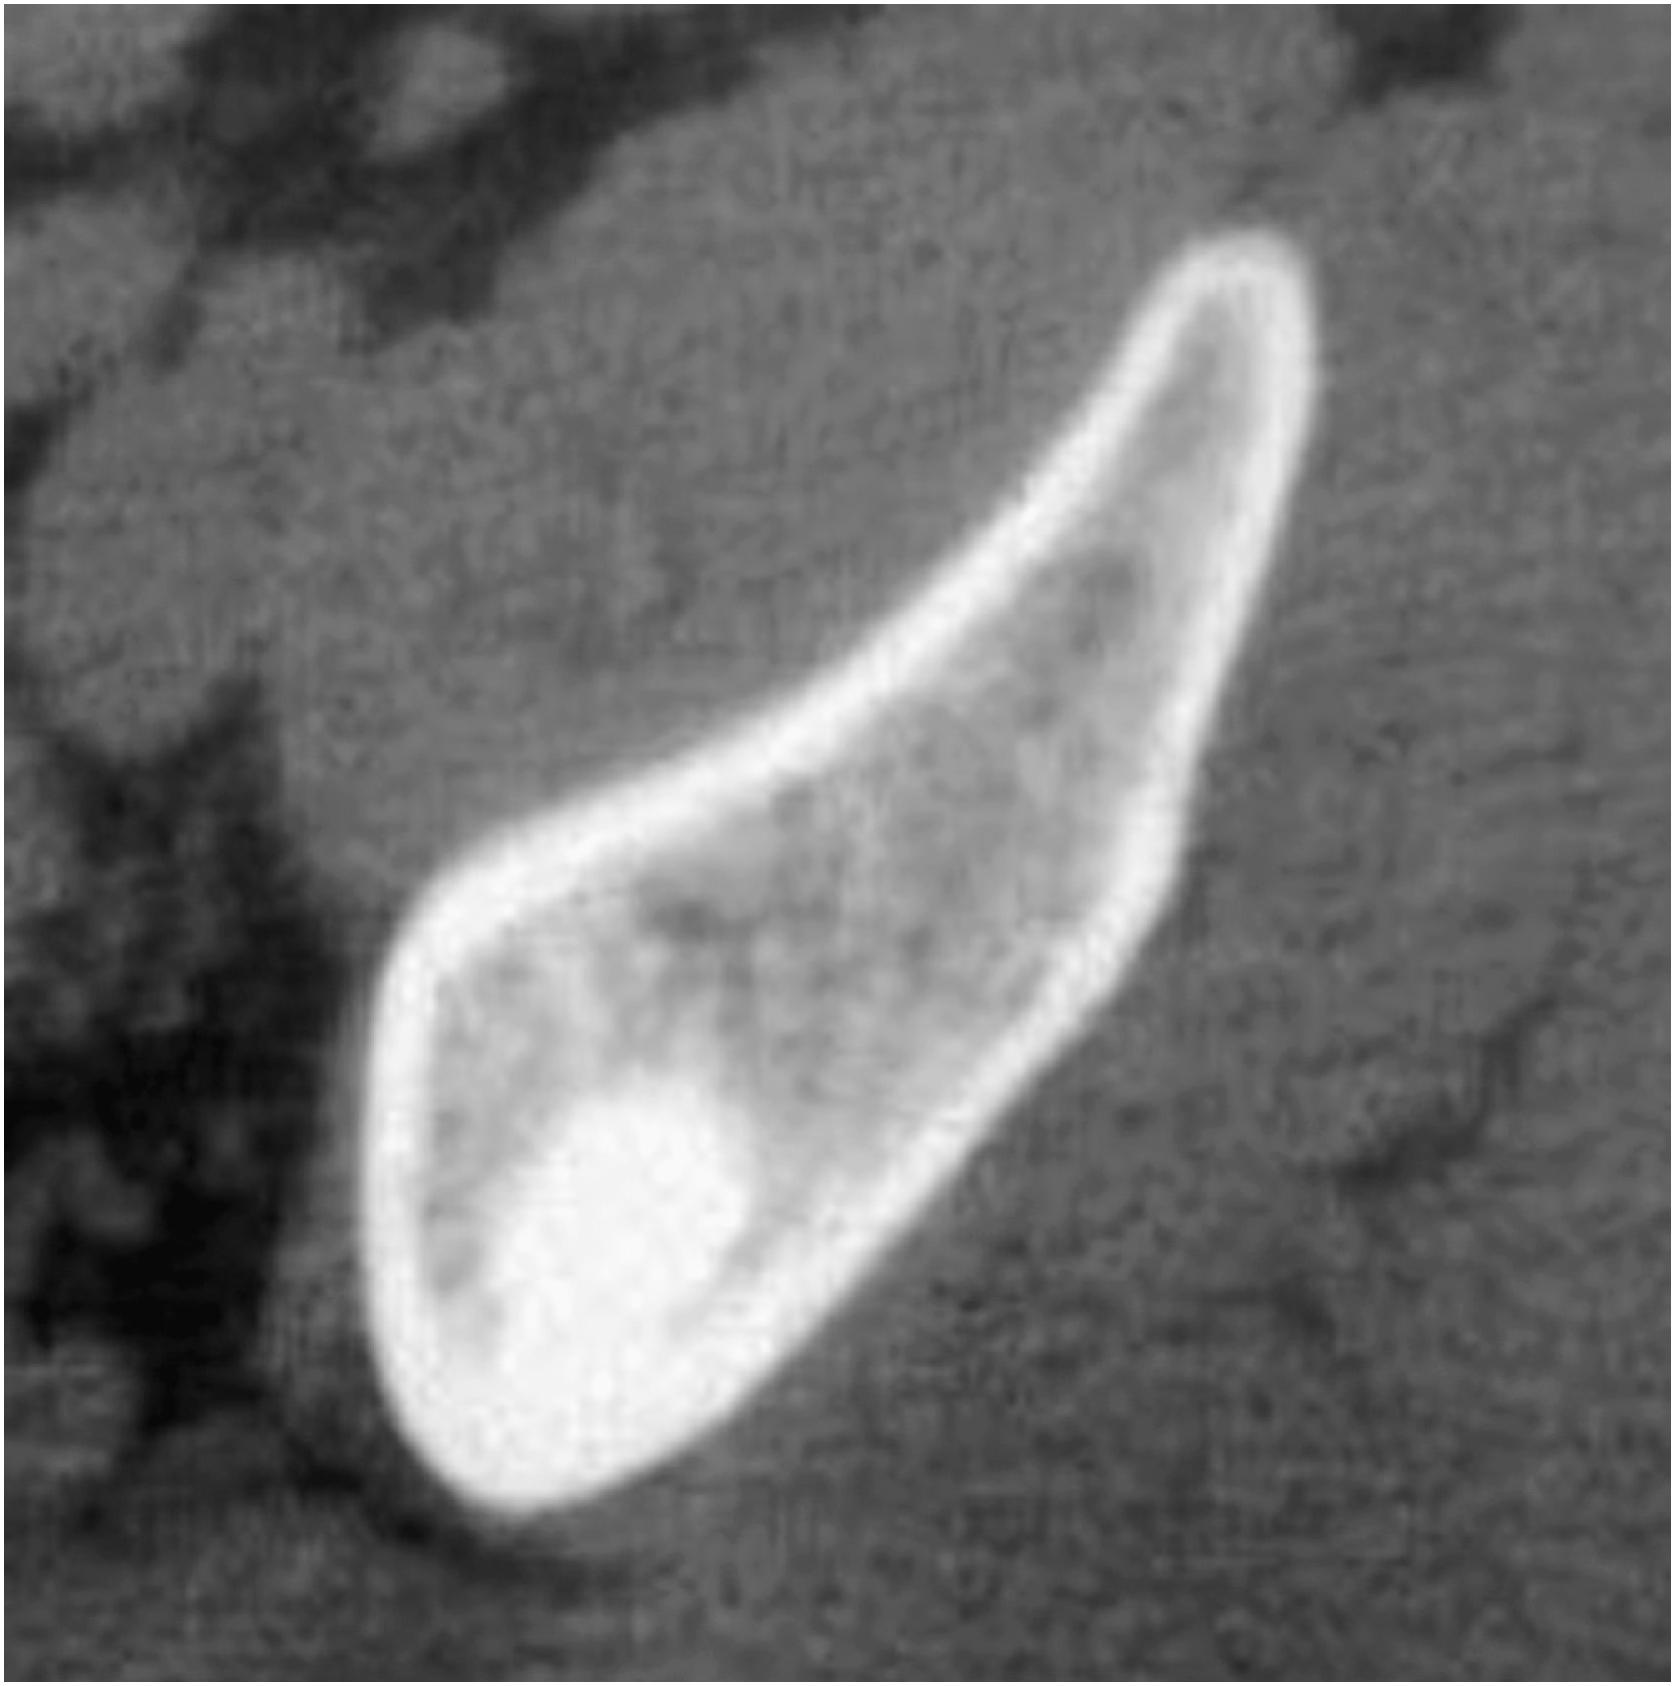 Fig. 16.3, Axial computed tomographic scan of a bone island in the ilium. Note the speiulated margin and homogeneous radiodensity.